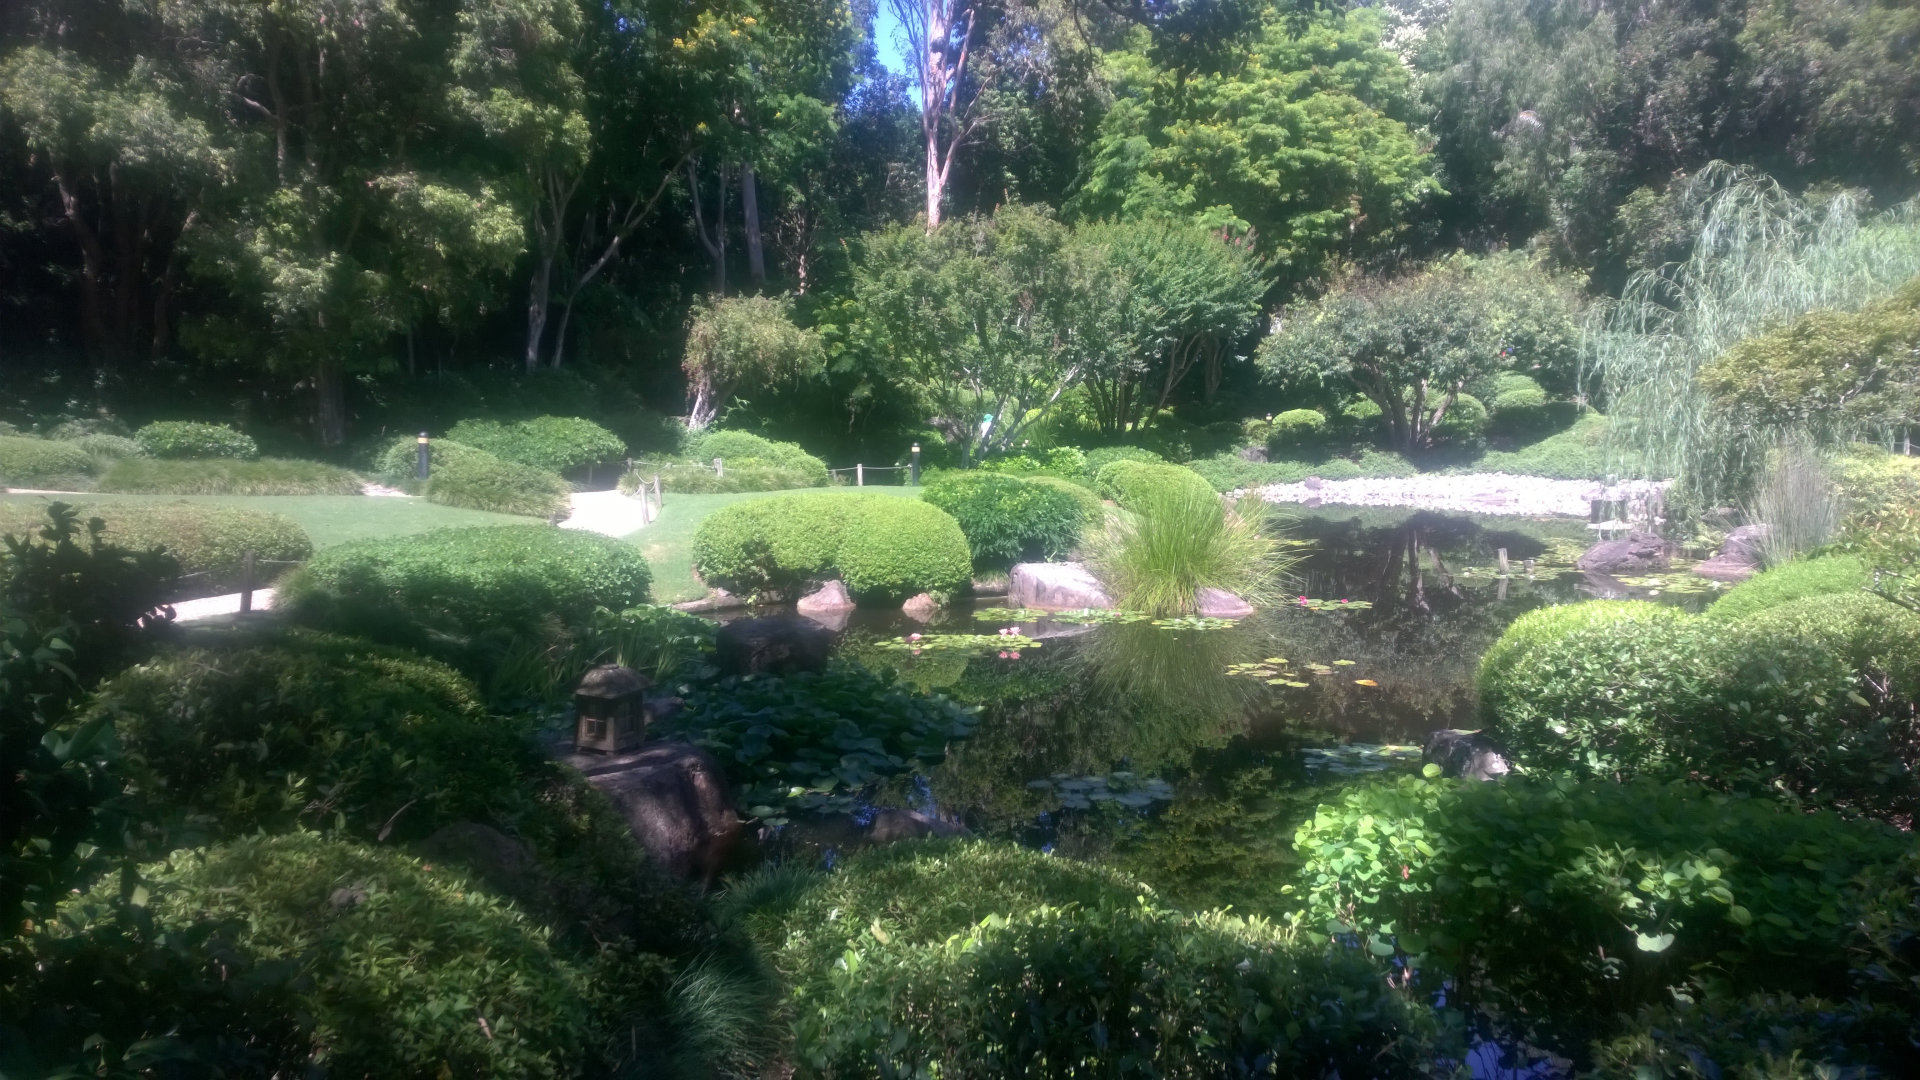 Japanese Gardens in The Brisbane Botanical Gardens at Mt Coot-tha. The gardens have 56 hectares of subtropical gardens, with more than 100,000 plants of 5,000 species